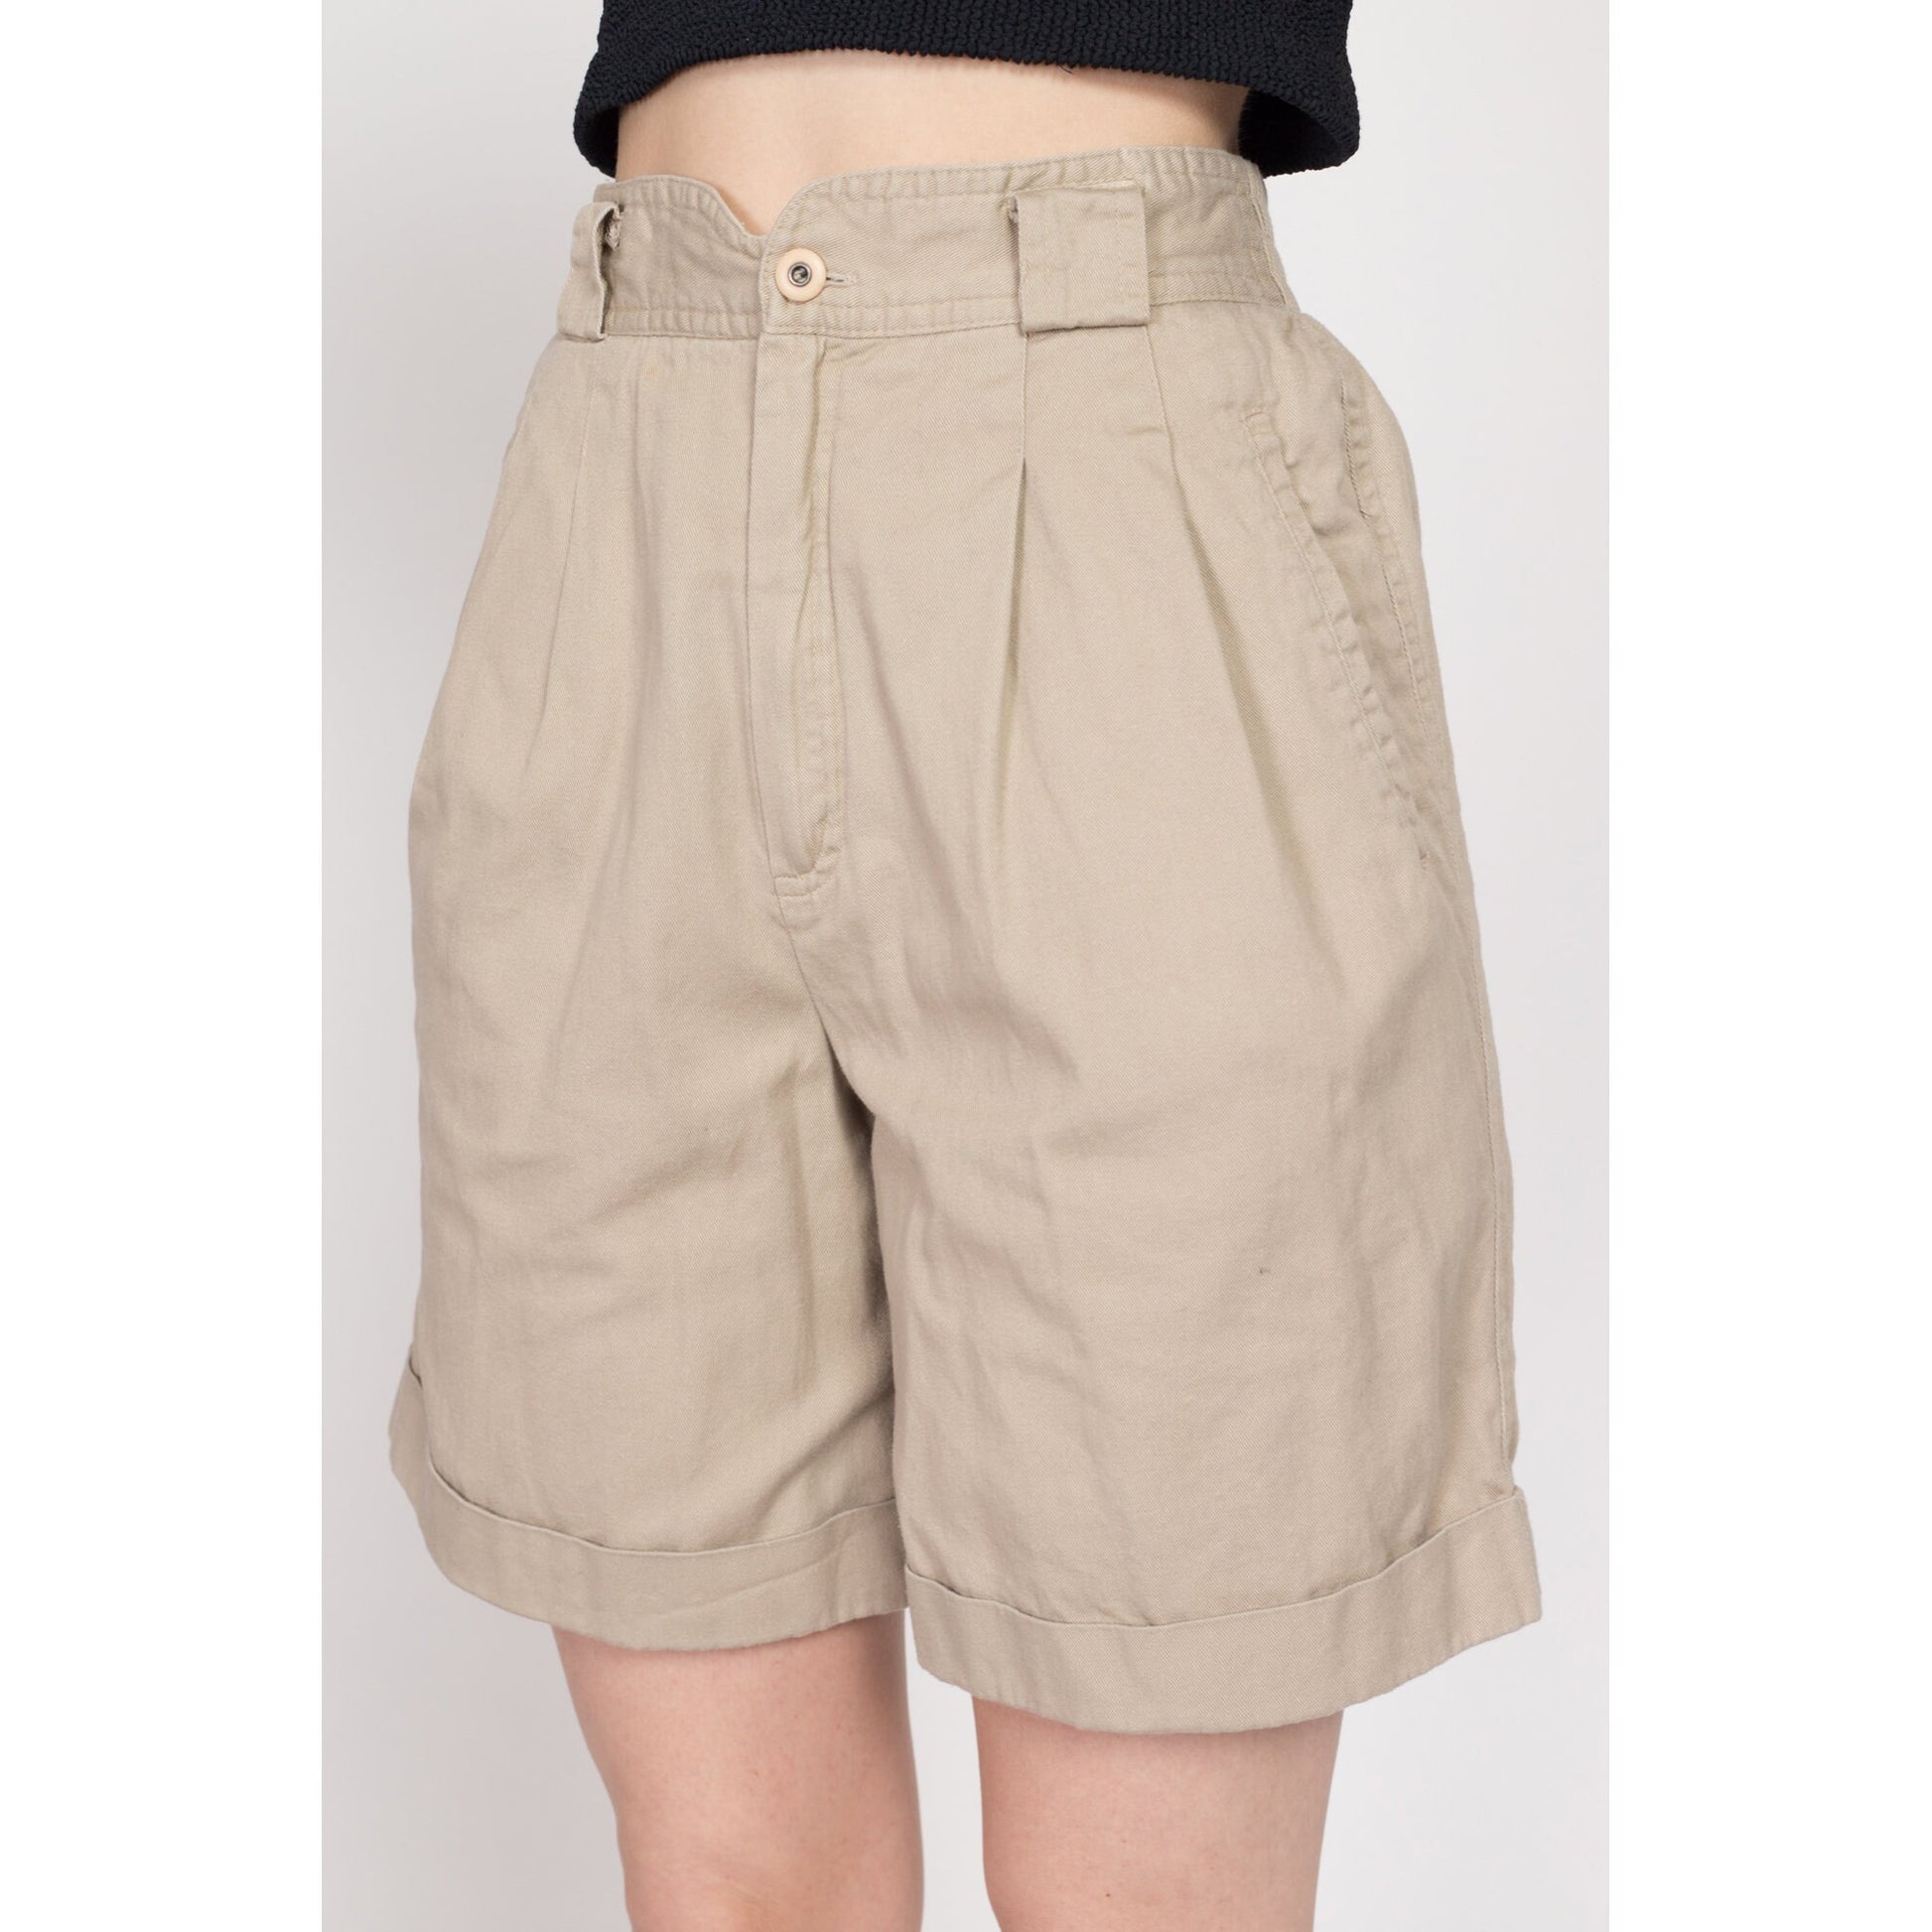 XS-Sm 80s Khaki High Waisted Pleated Shorts 24"-27" | Vintage Cotton Casual Mom Shorts